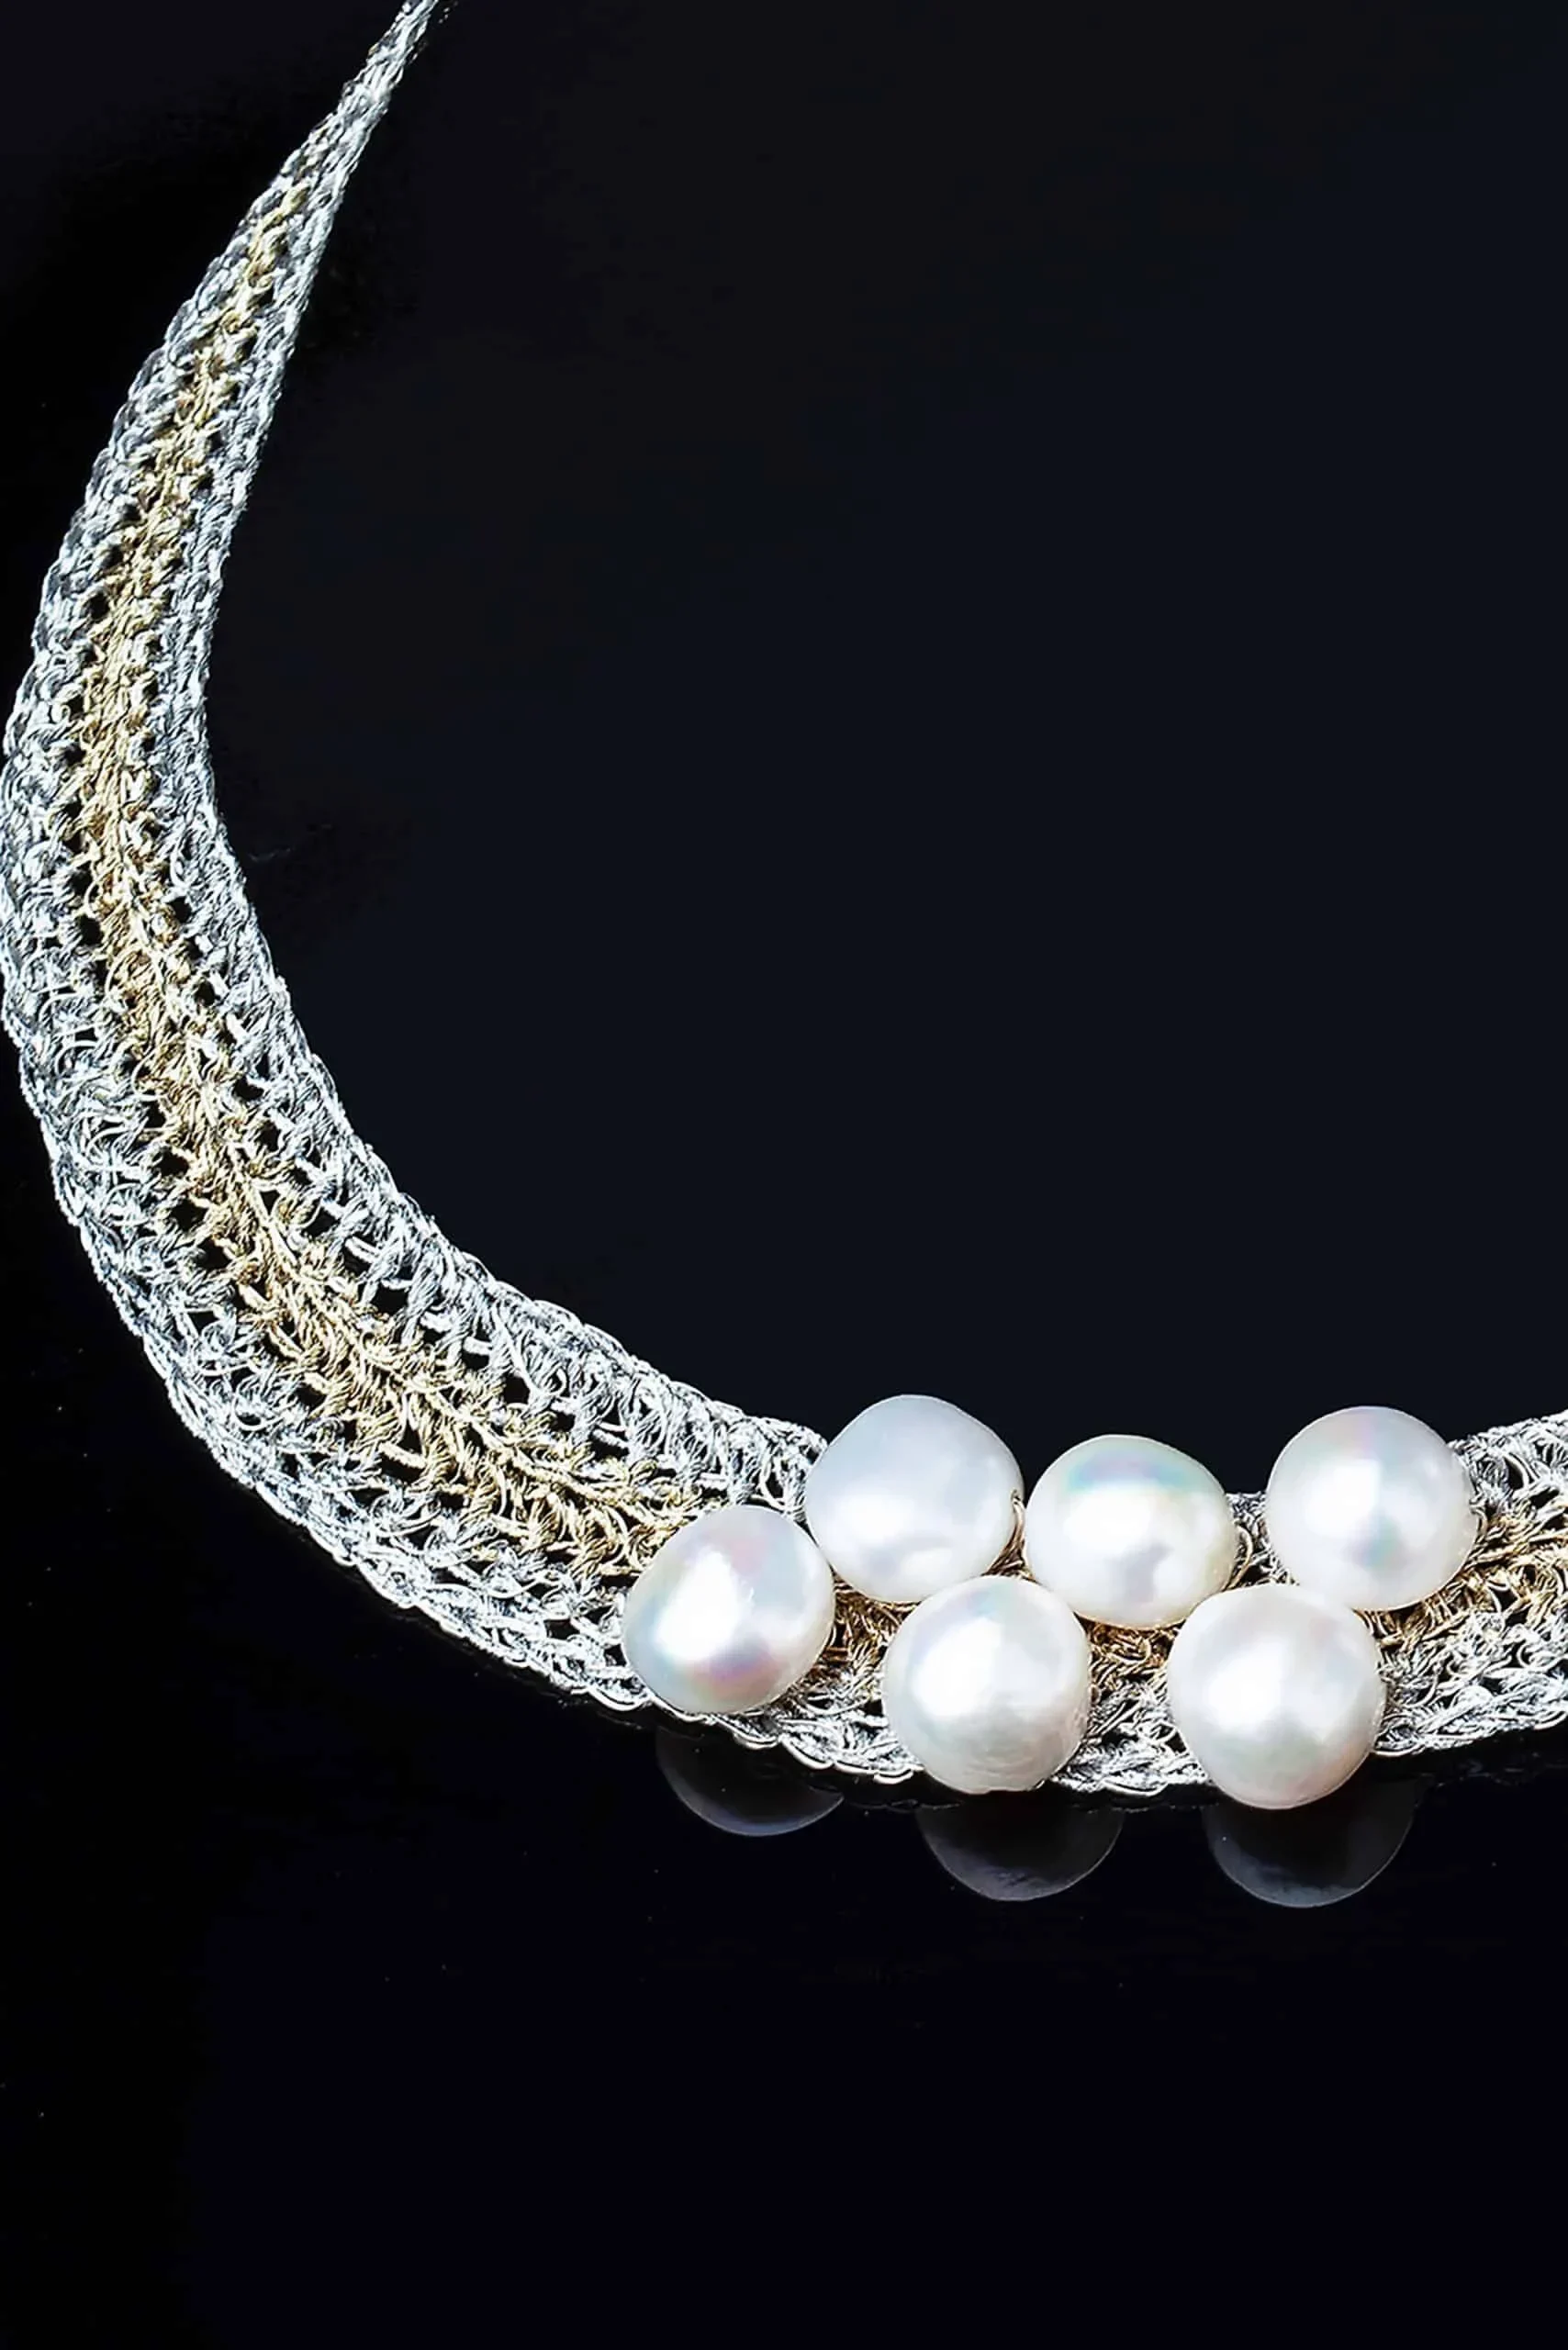 Handmade Jewellery | Crochet knit silver necklace with and pearls gallery 2